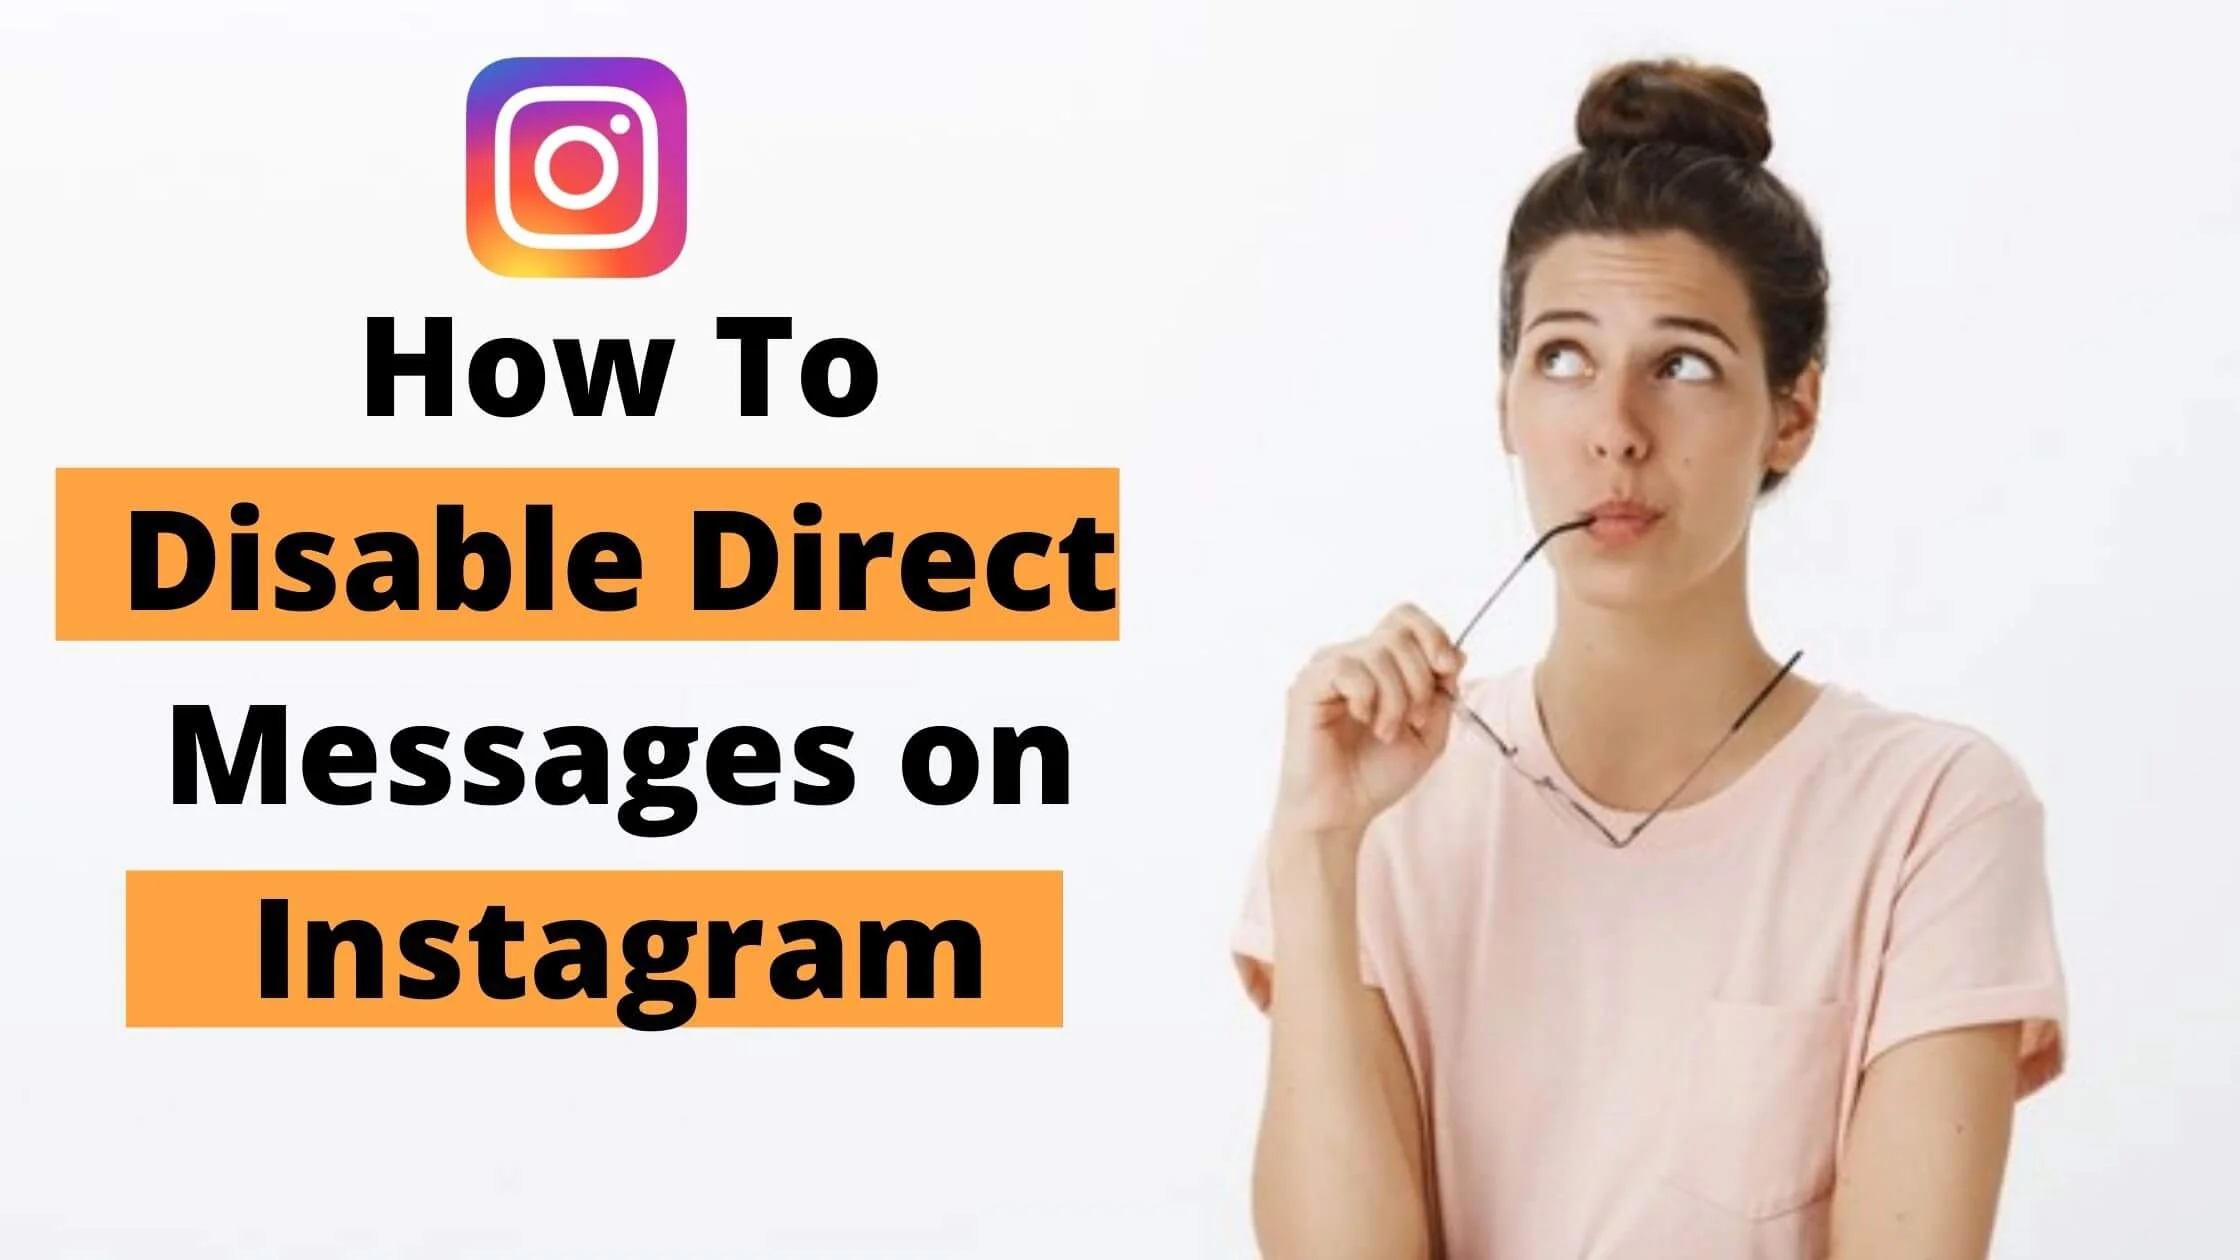 How To Disable Direct Messages on Instagram